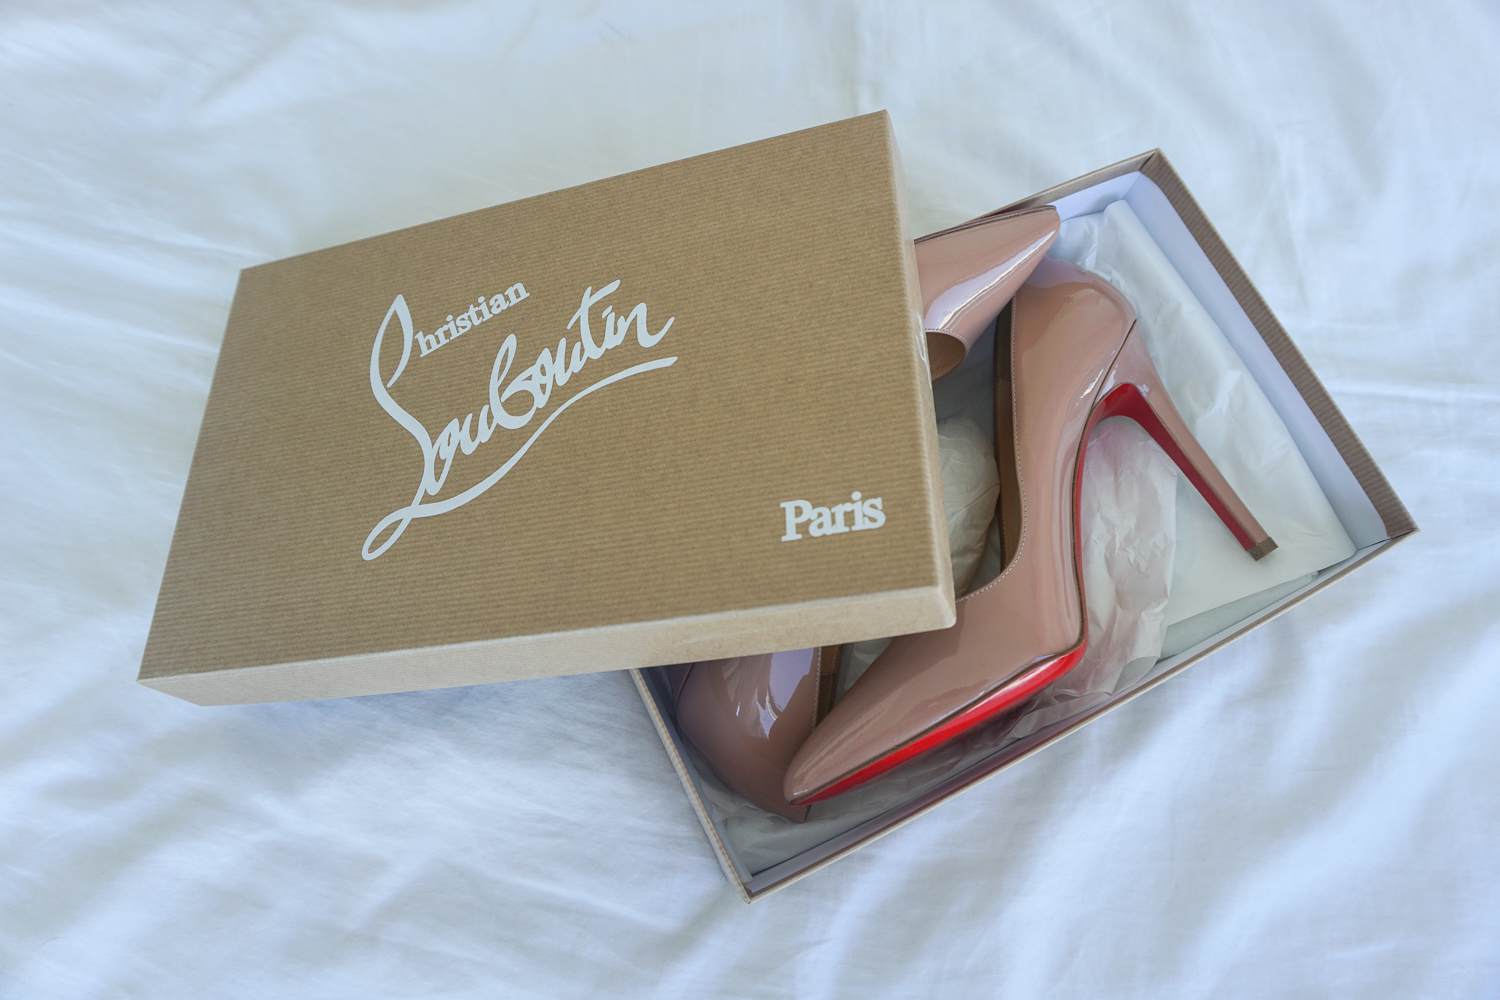 First Pair of Louboutins 